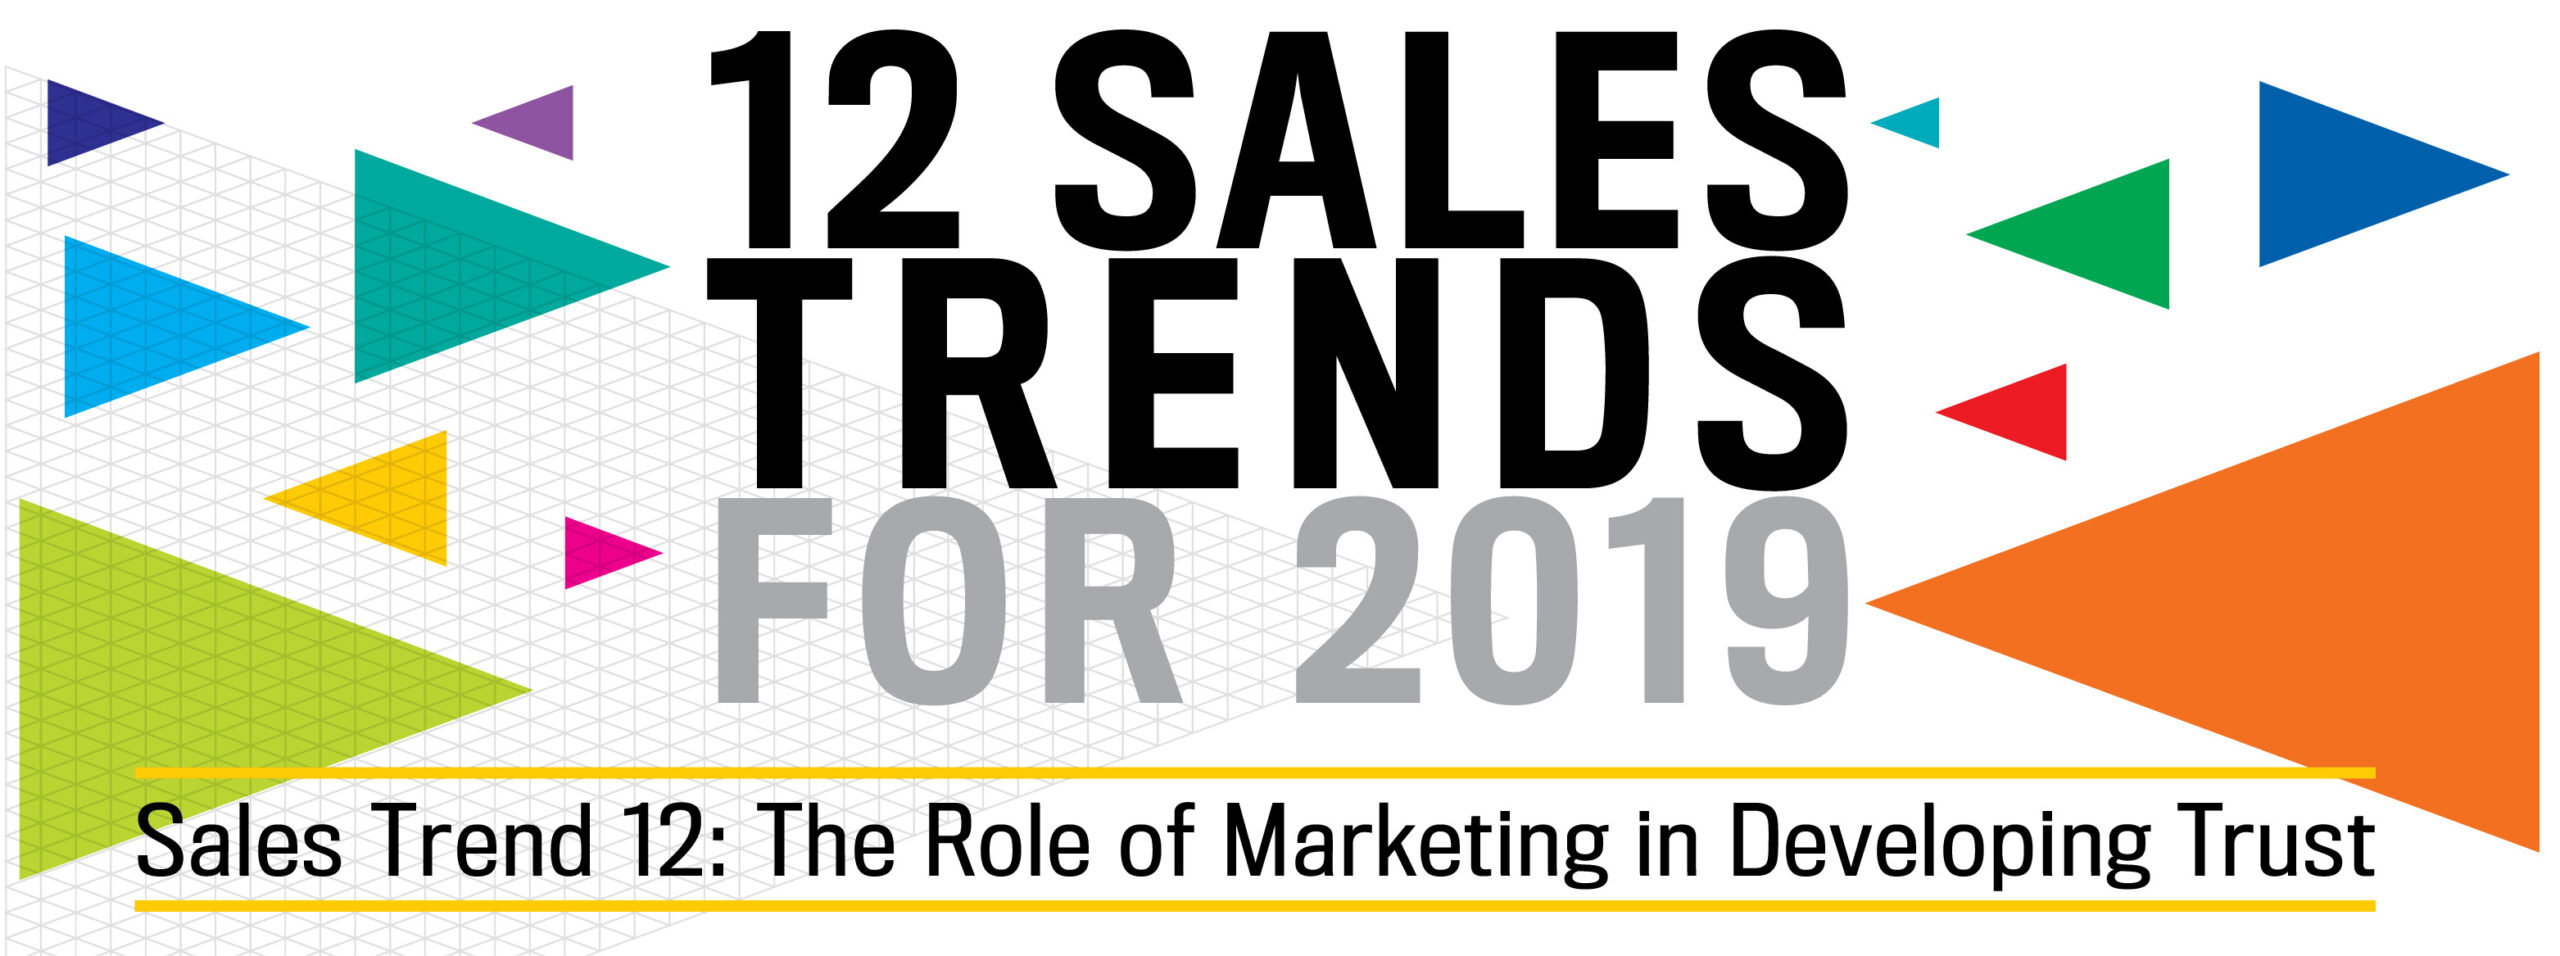 Barrett-Sales-Trends-12-2019-The-role-of-marketing-in-developing-trust